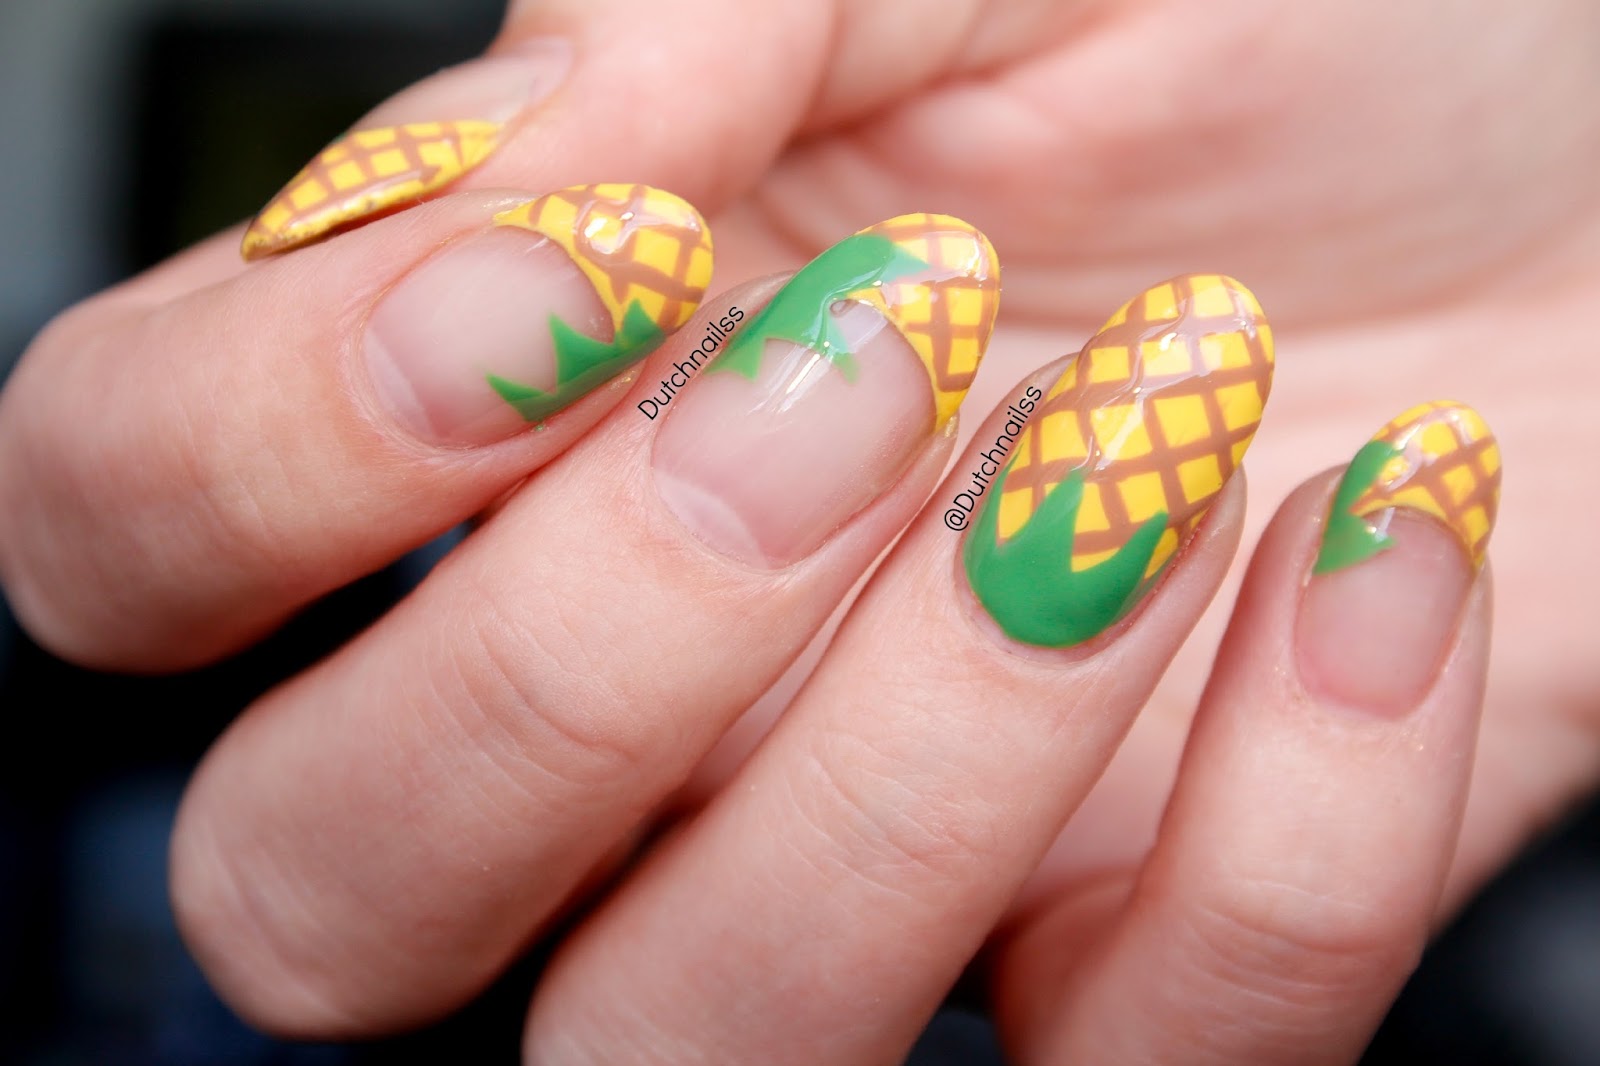 August Nail Designs - wide 9